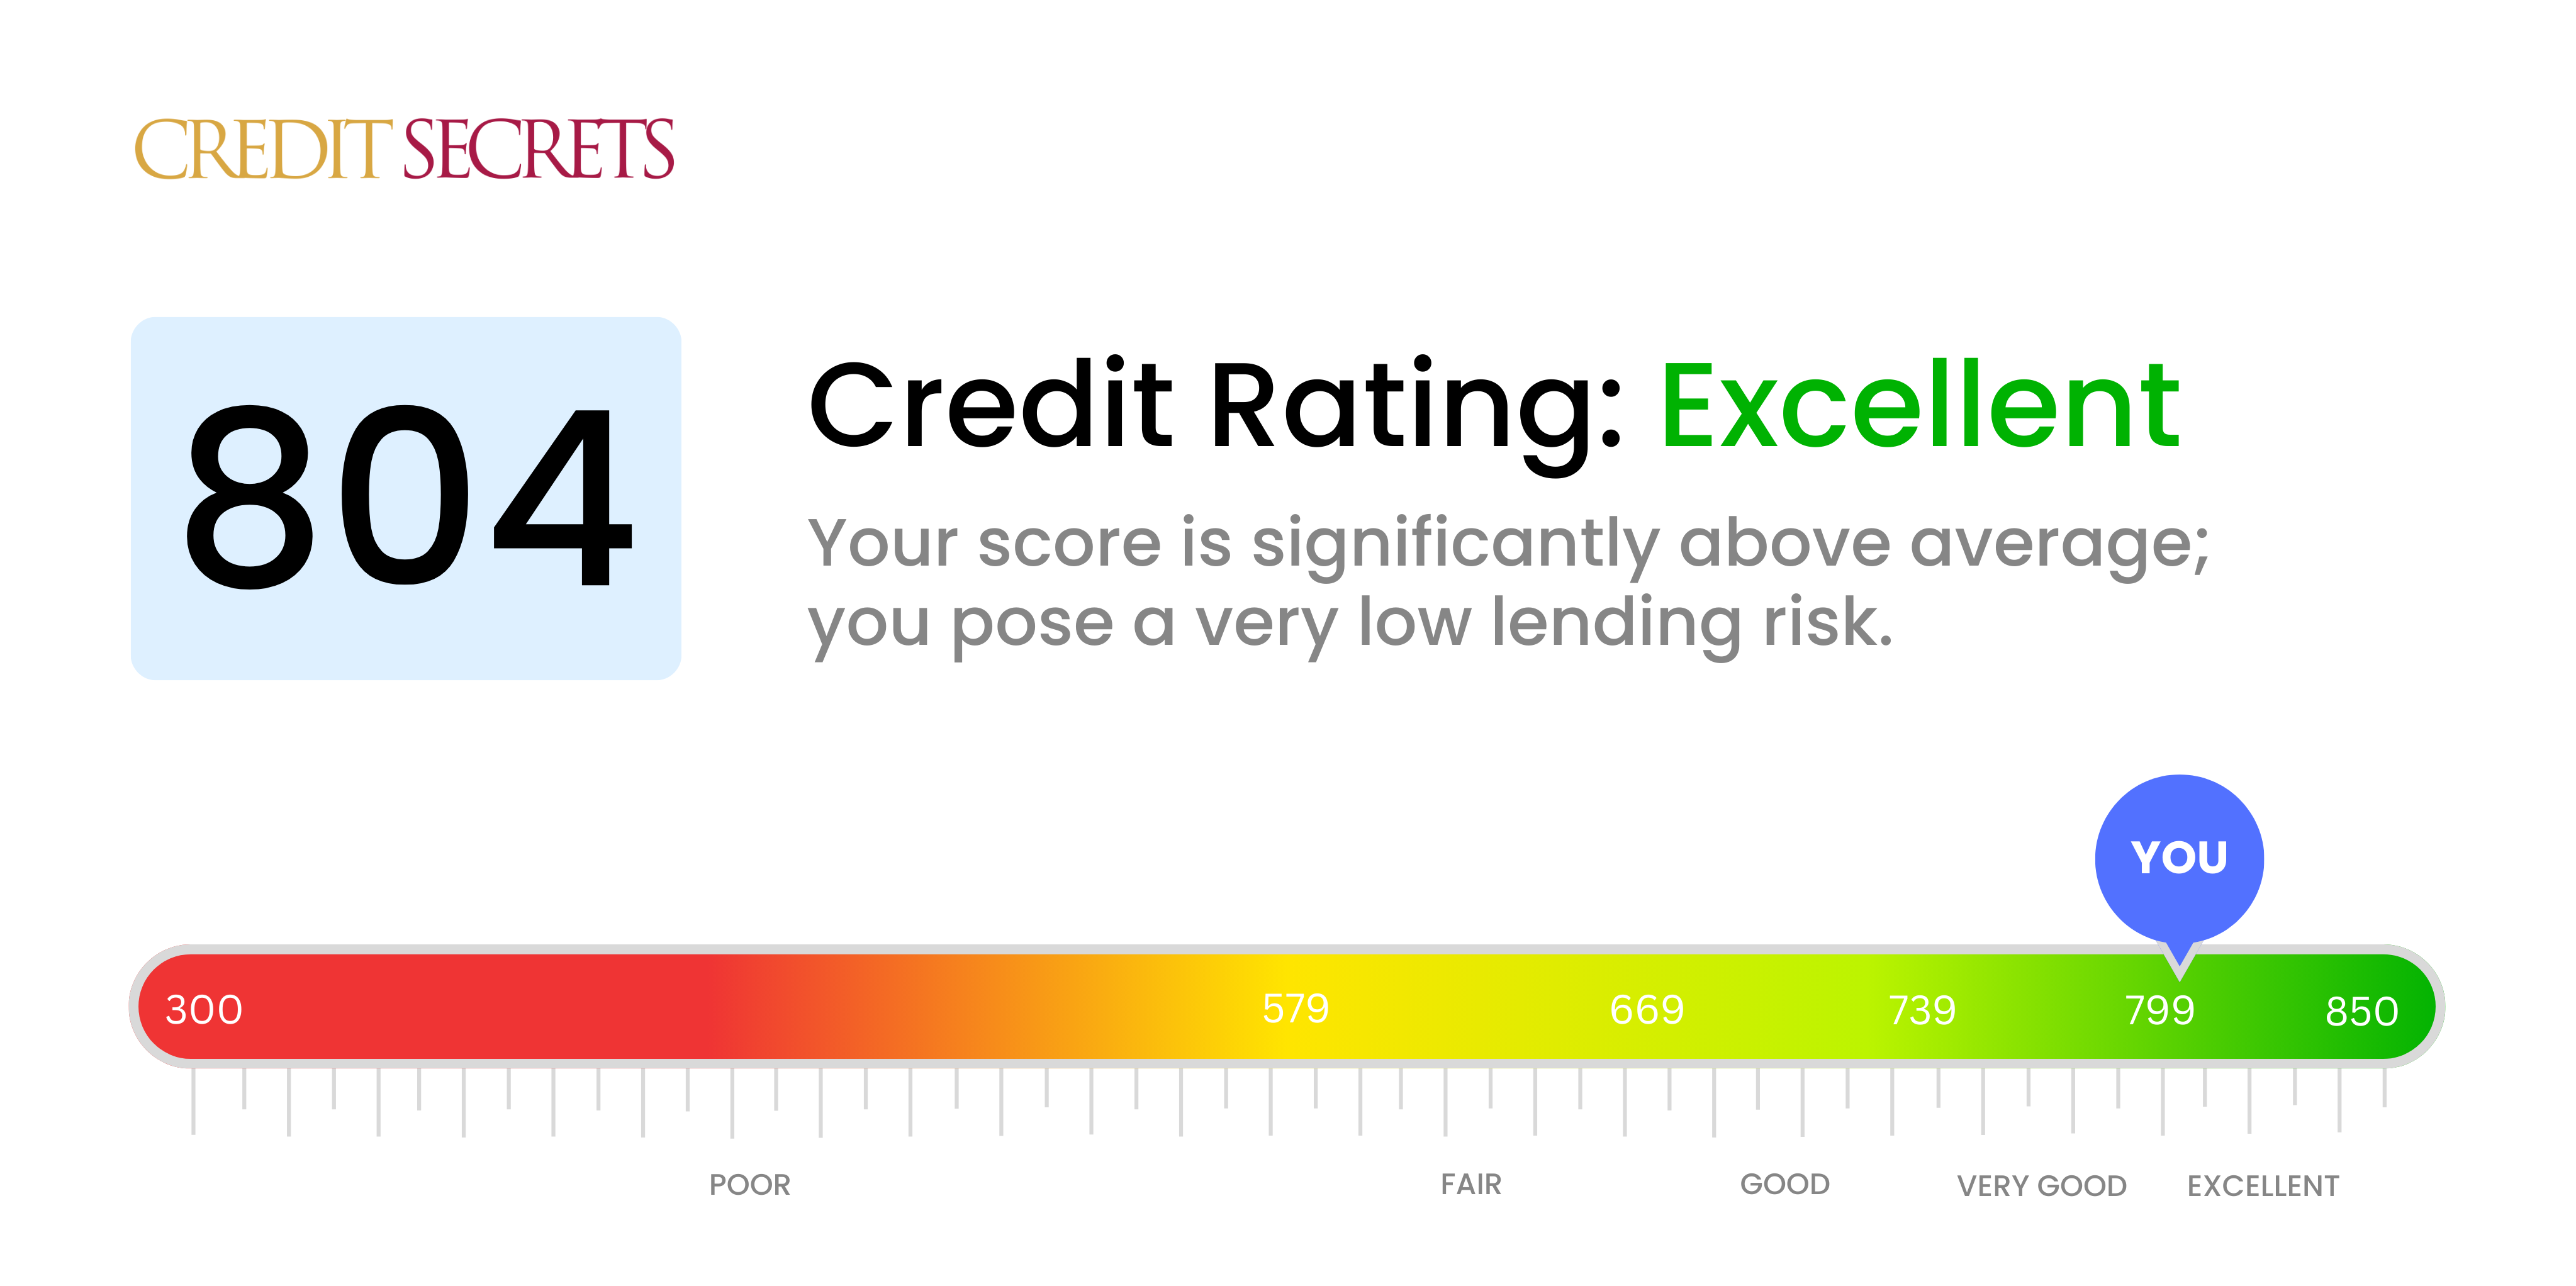 Is 804 a good credit score?